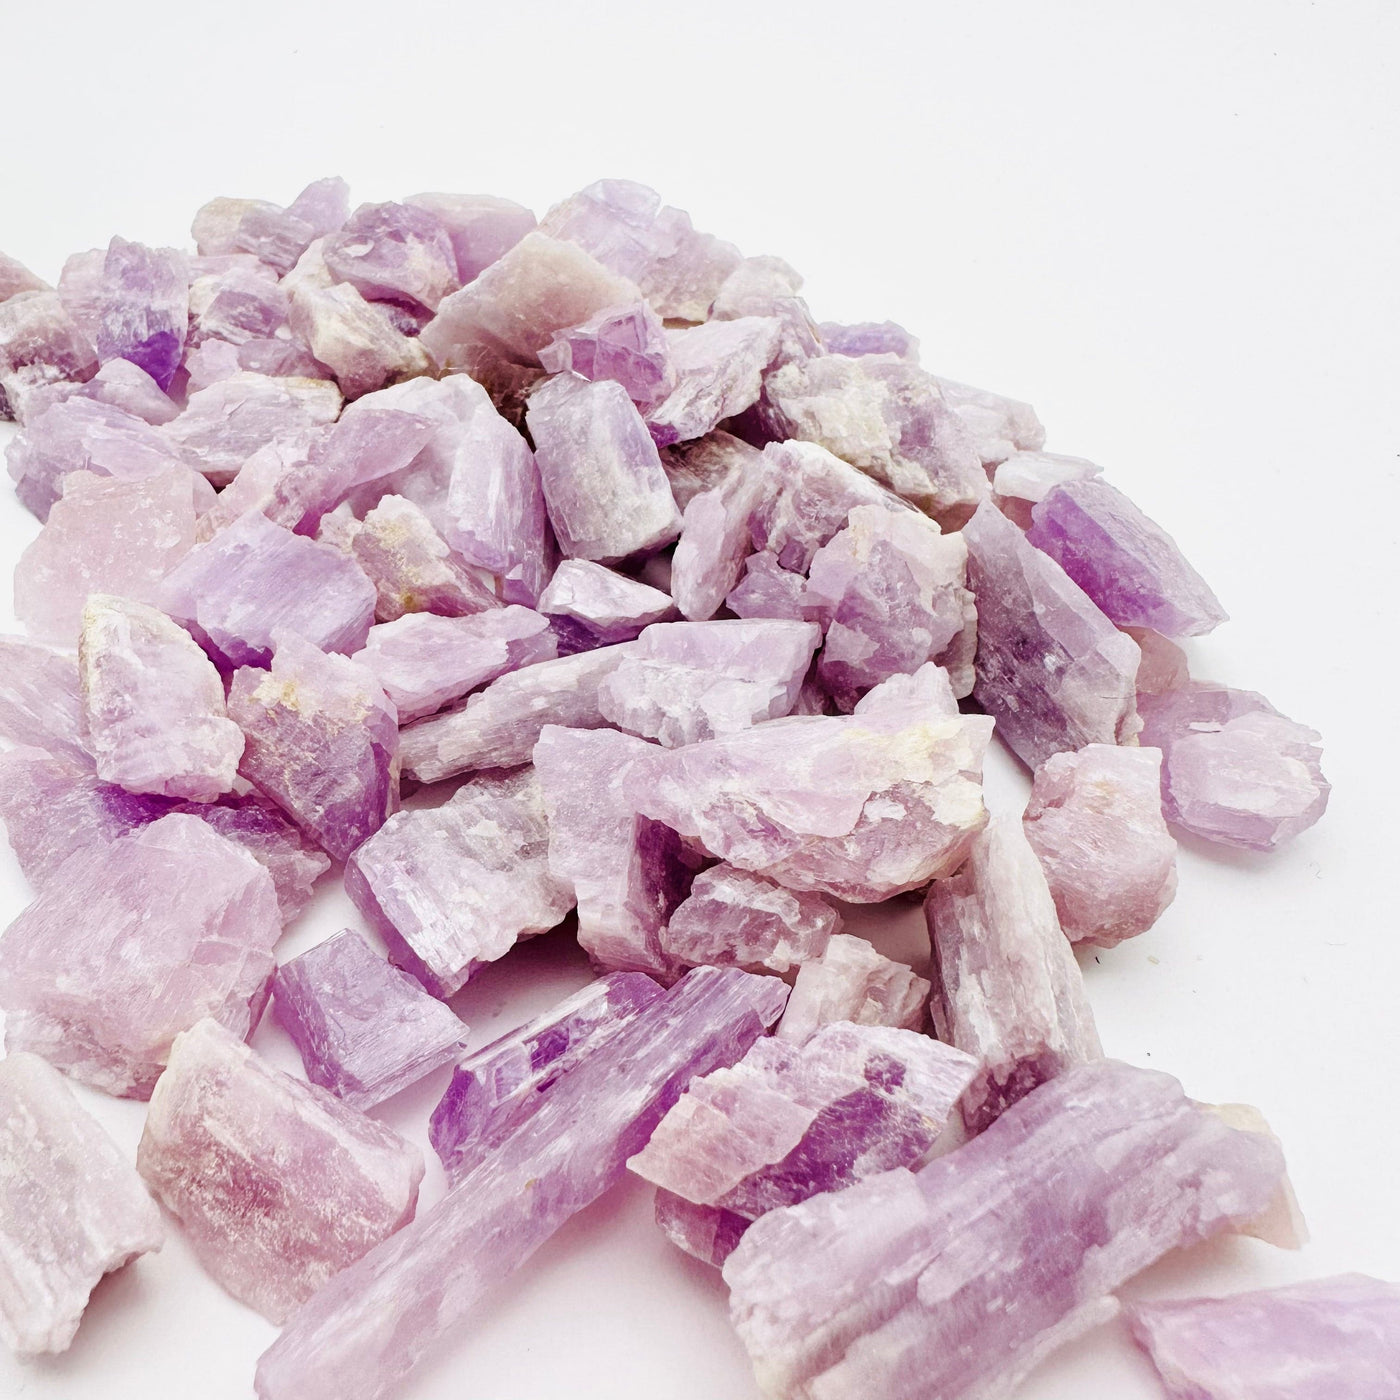 Raw Kunzite - YOU GET ALL - close up view